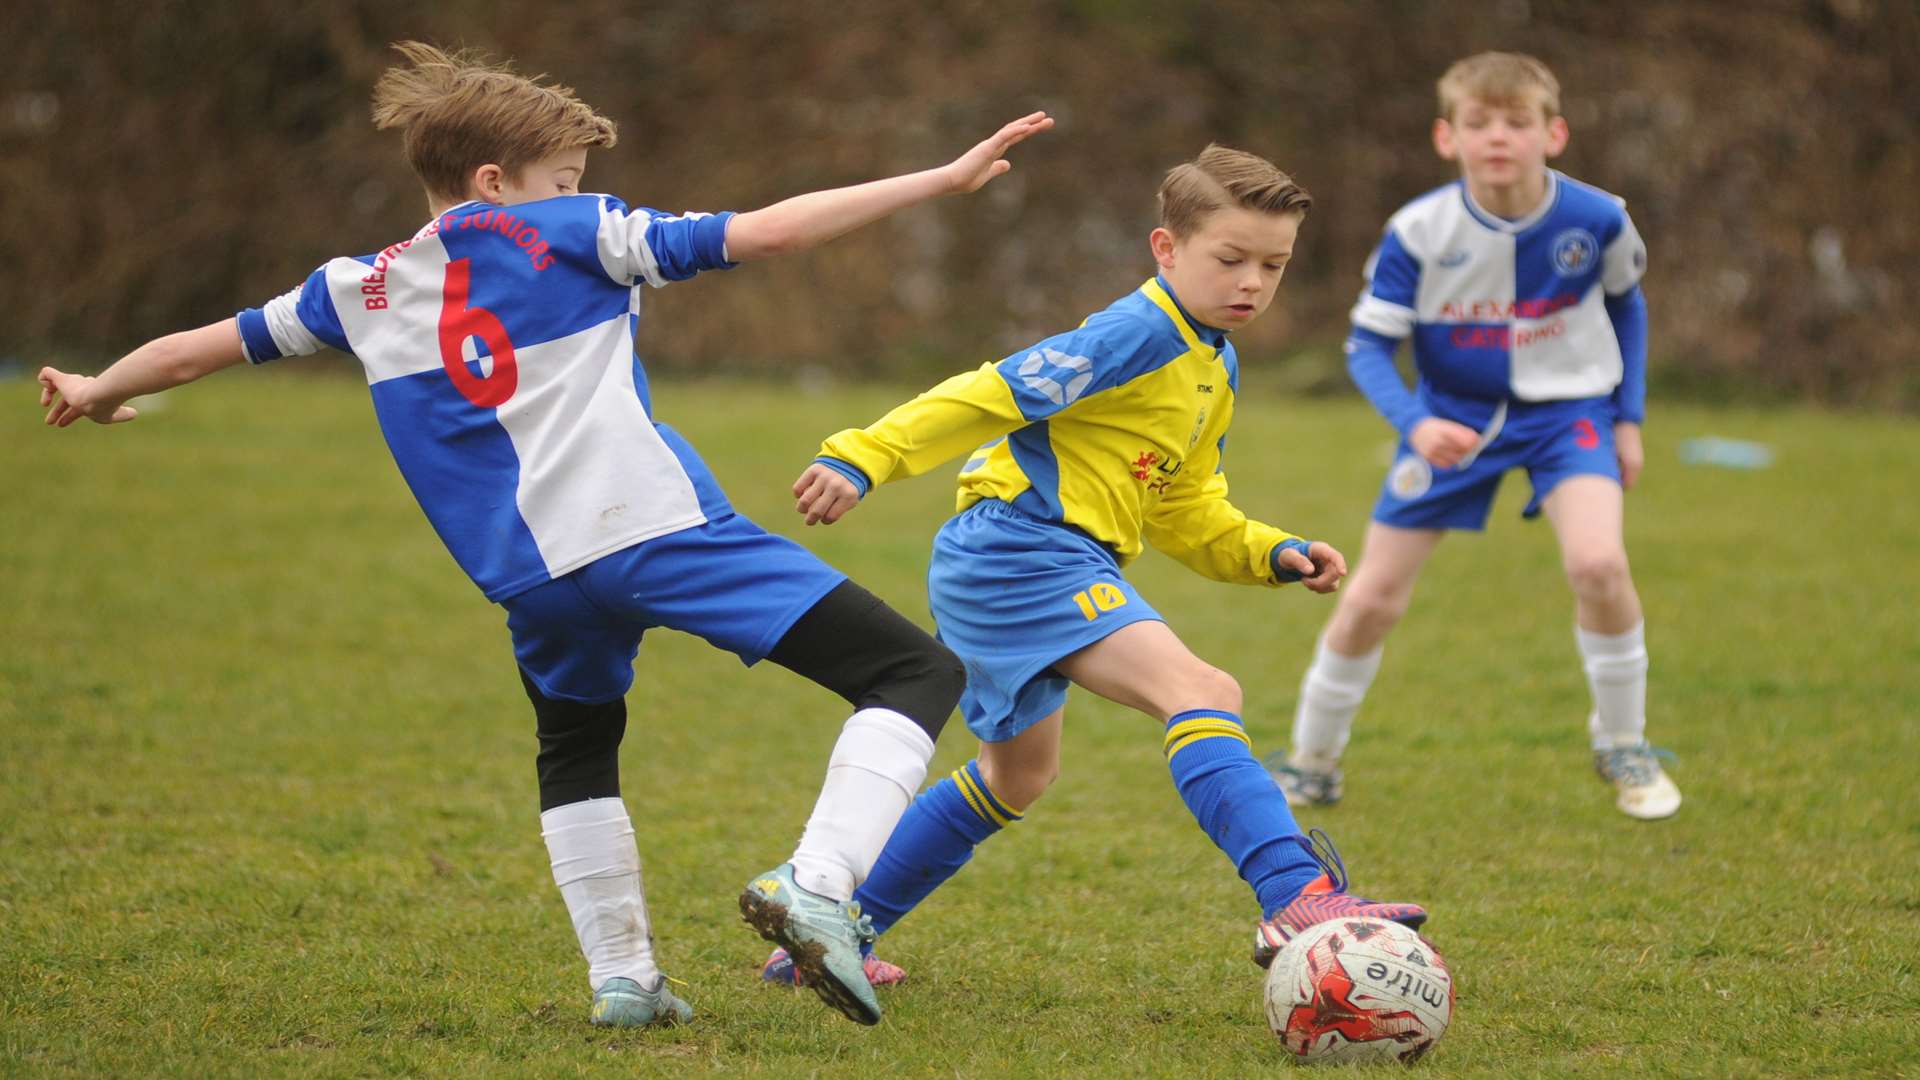 Strood 87 under-10s (yellow) challenged by Bredhurst Juniors Picture: Steve Crispe